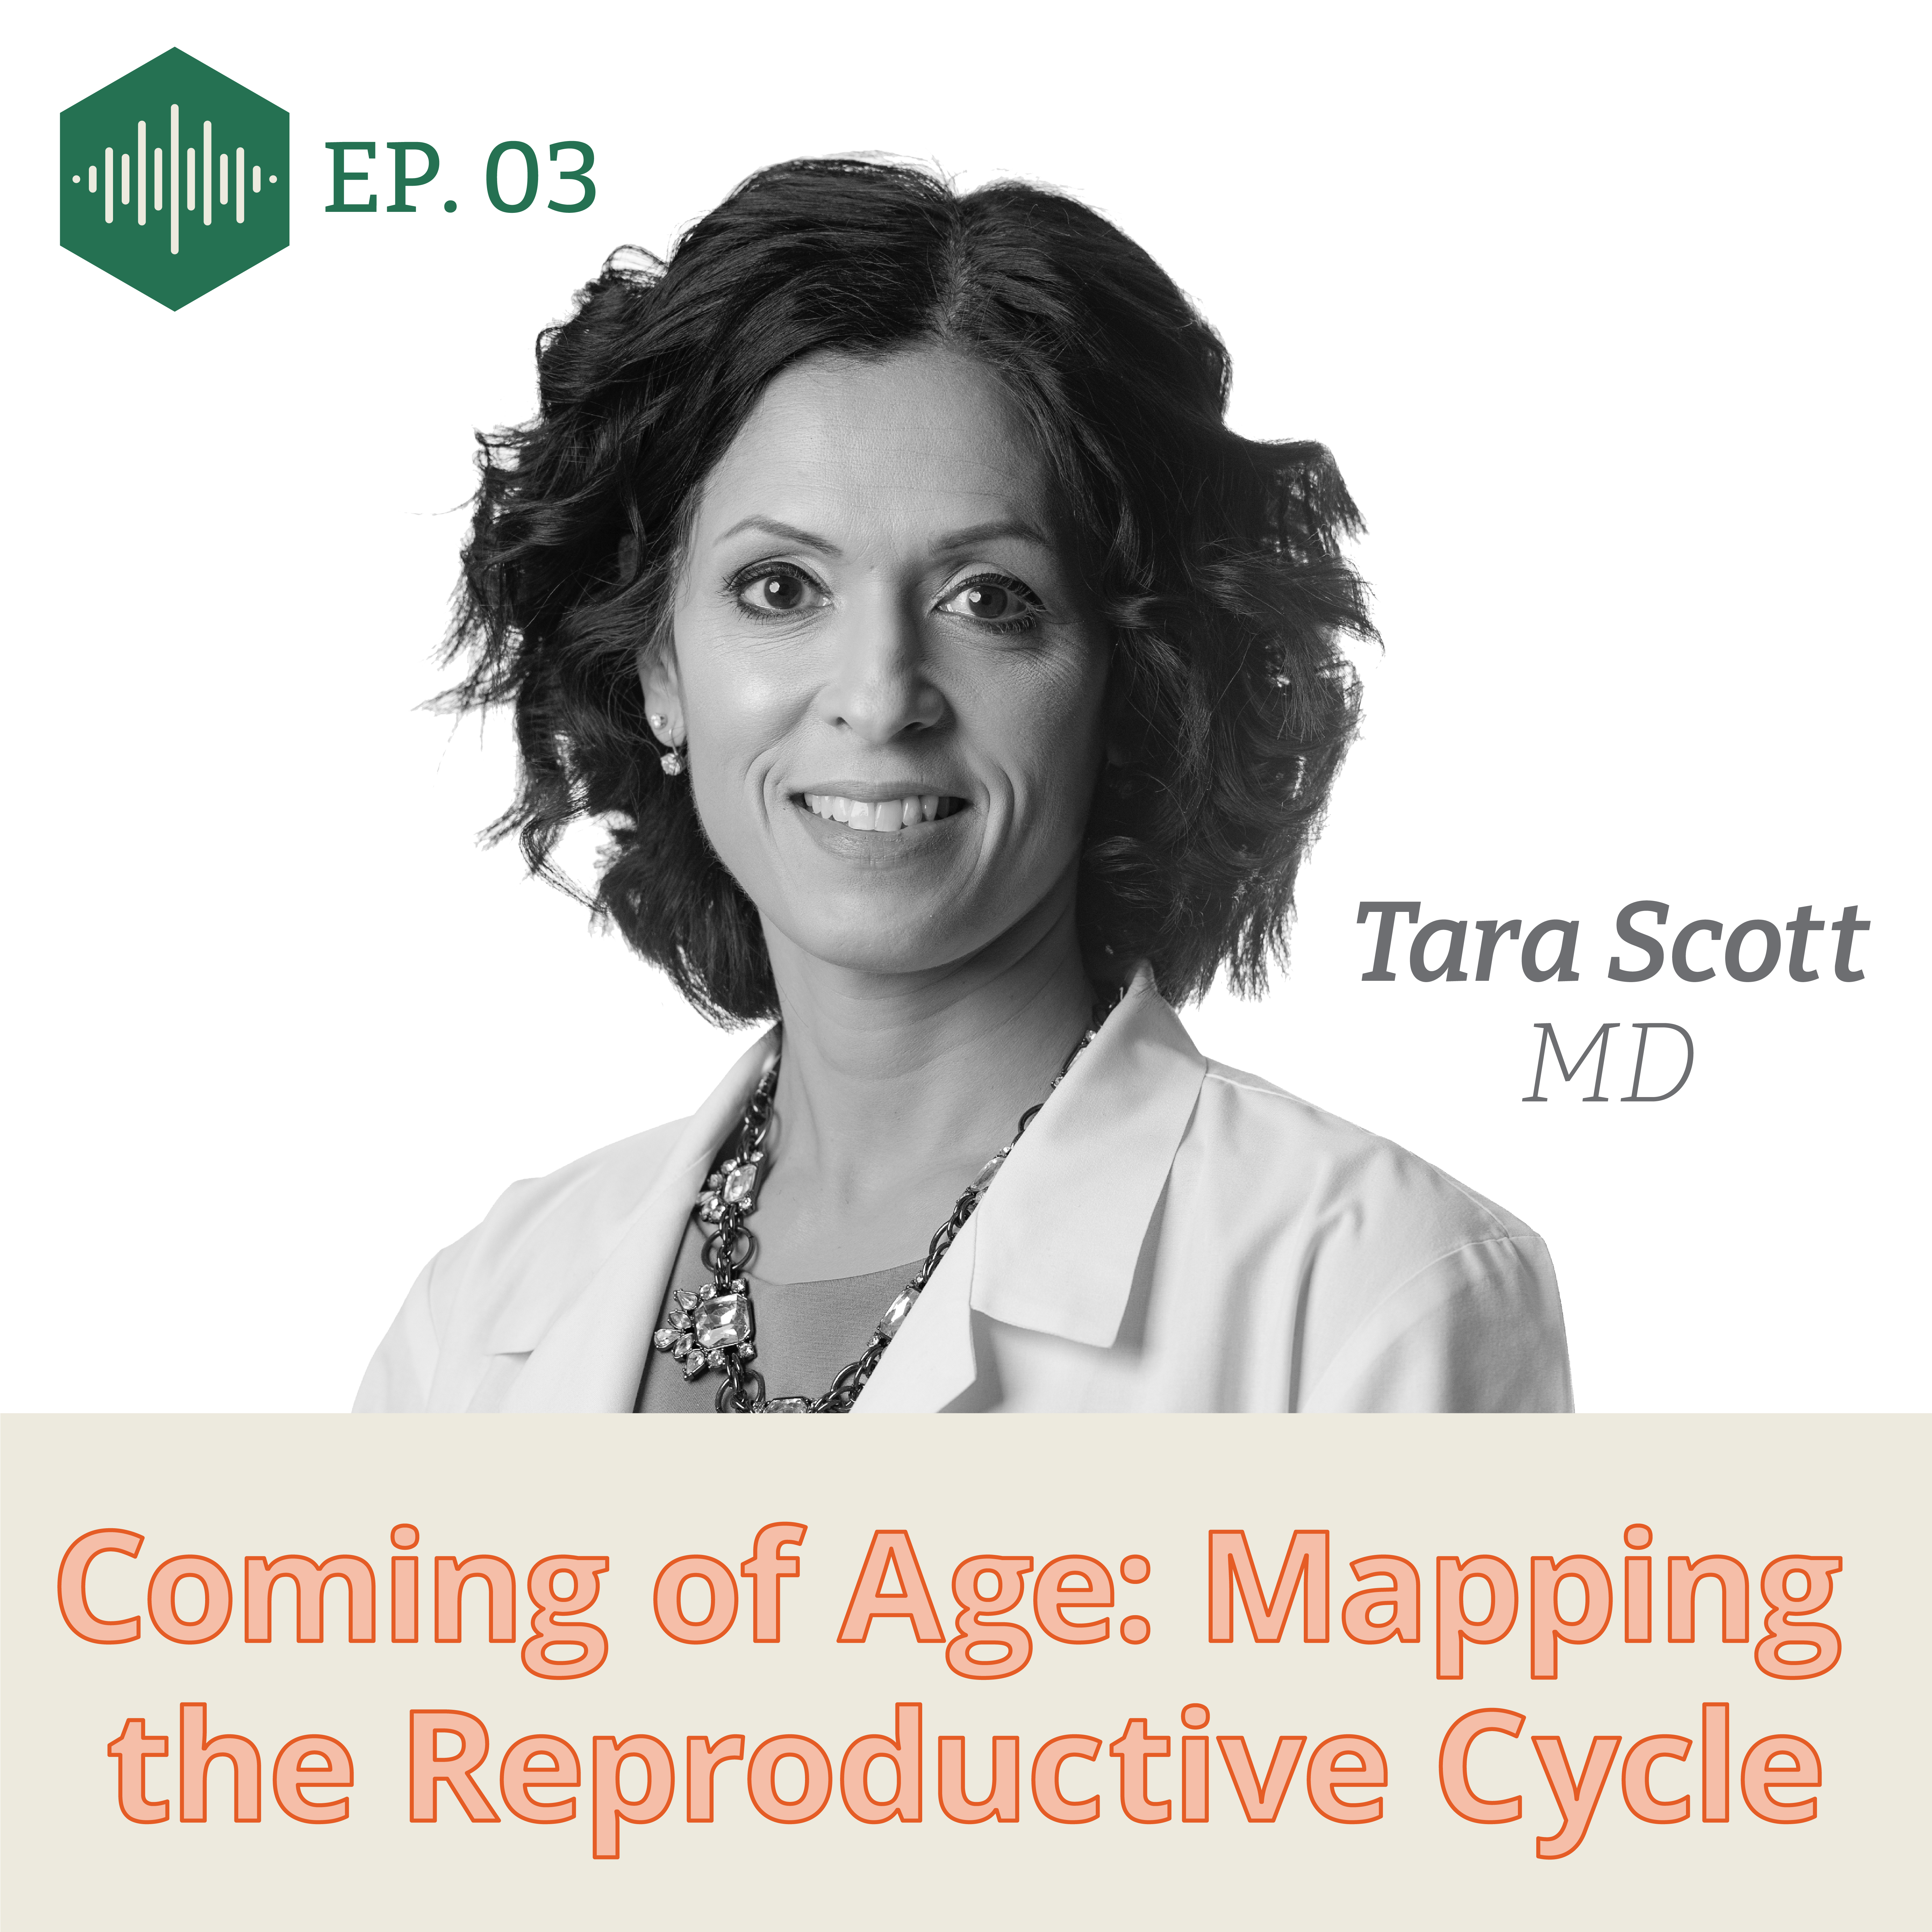 dr tara scott headshot with episode title "coming of age: mapping the reproductive cycle"